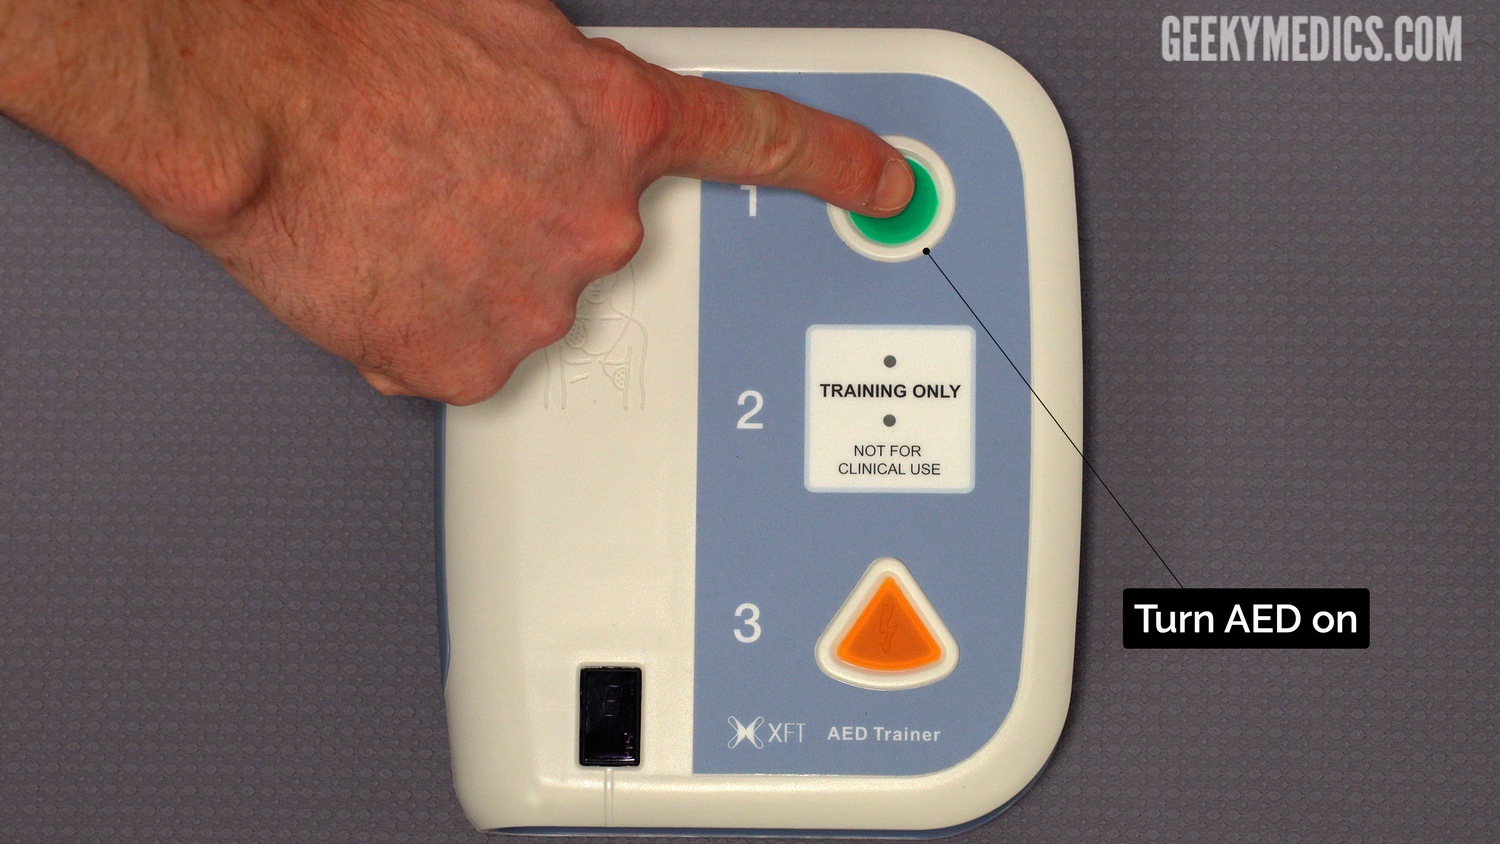 Switch on the AED